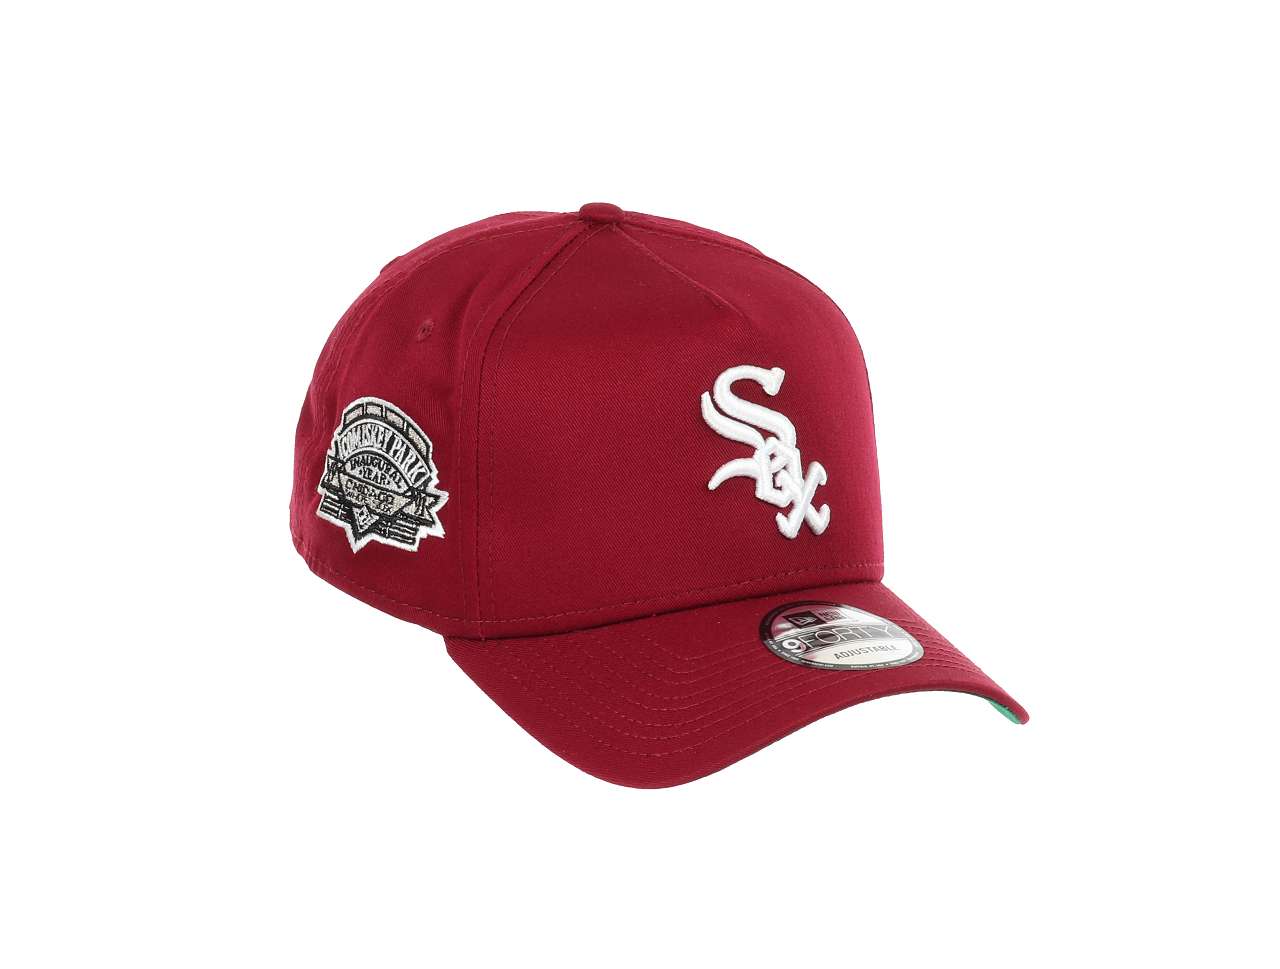 Chicago White Sox MLB Comiskey Park Inaugural Year Sidepatch Cardinal 9Forty A-Frame Snapback Cap New Era